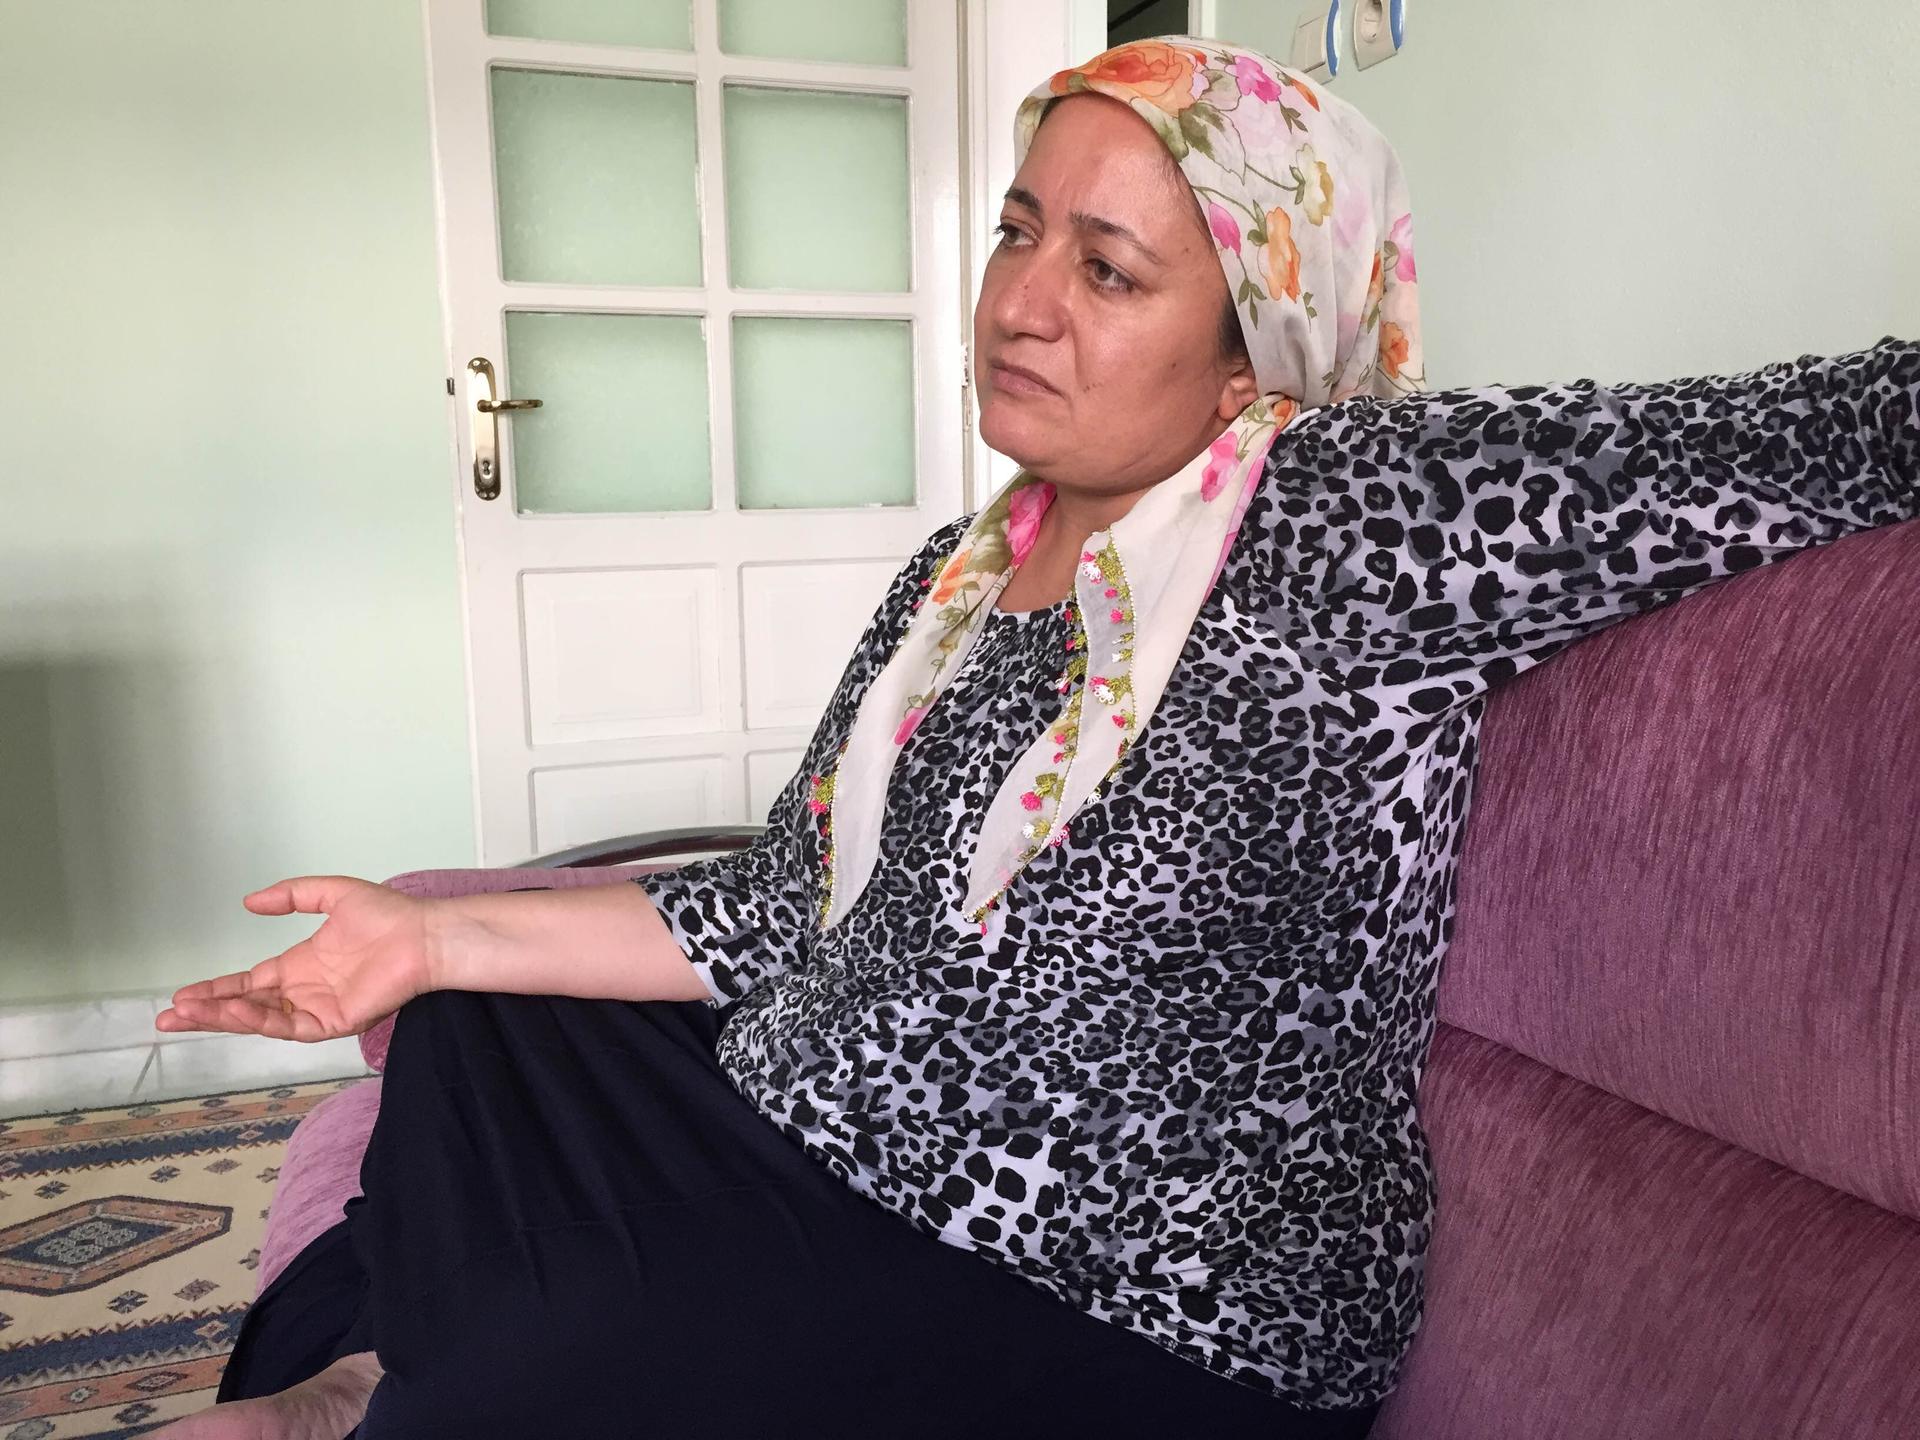 Hatice Gönder wonders whether her son, Orhan, was pressured into joining ISIS.